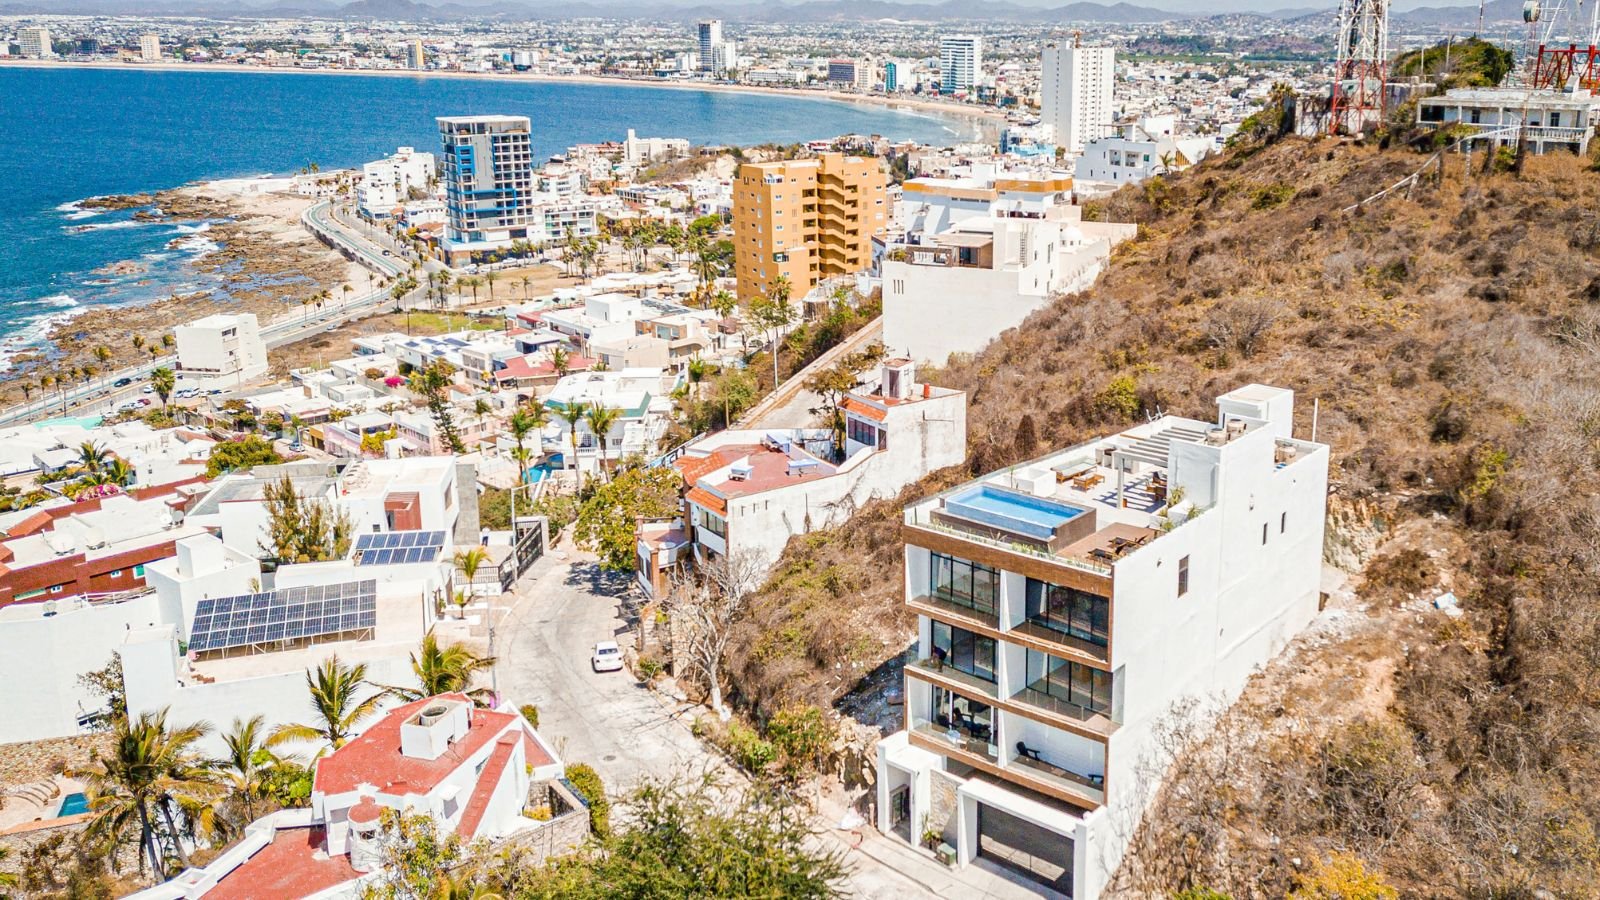 <p>Mazatlán is a Pacific coast city with <a href="https://mexicorelocationguide.com/why-you-should-consider-living-in-mazatlan/#:~:text=Population%20in%20Mazatlan,who've%20moved%20to%20Mazatlan." rel="noopener">almost 10,000 expats</a>. Known as the “Mexican Rivieras,” it offers a unique blend of history and seaside charm. The city attracts retirees and artists with its English-speaking locals and diverse recreational opportunities. The cost of living is lower than in many Mexican cities, with one-bedroom apartments ranging from <a href="https://www.expatexchange.com/ctryguide/7045/77/Mexico/Cost-of-Living-in-Mazatlan" rel="noopener">$400 to $1,000</a>. The city has a 20-mile beachfront, excellent healthcare facilities, and a vibrant nightlife in Zona Dorada.</p>